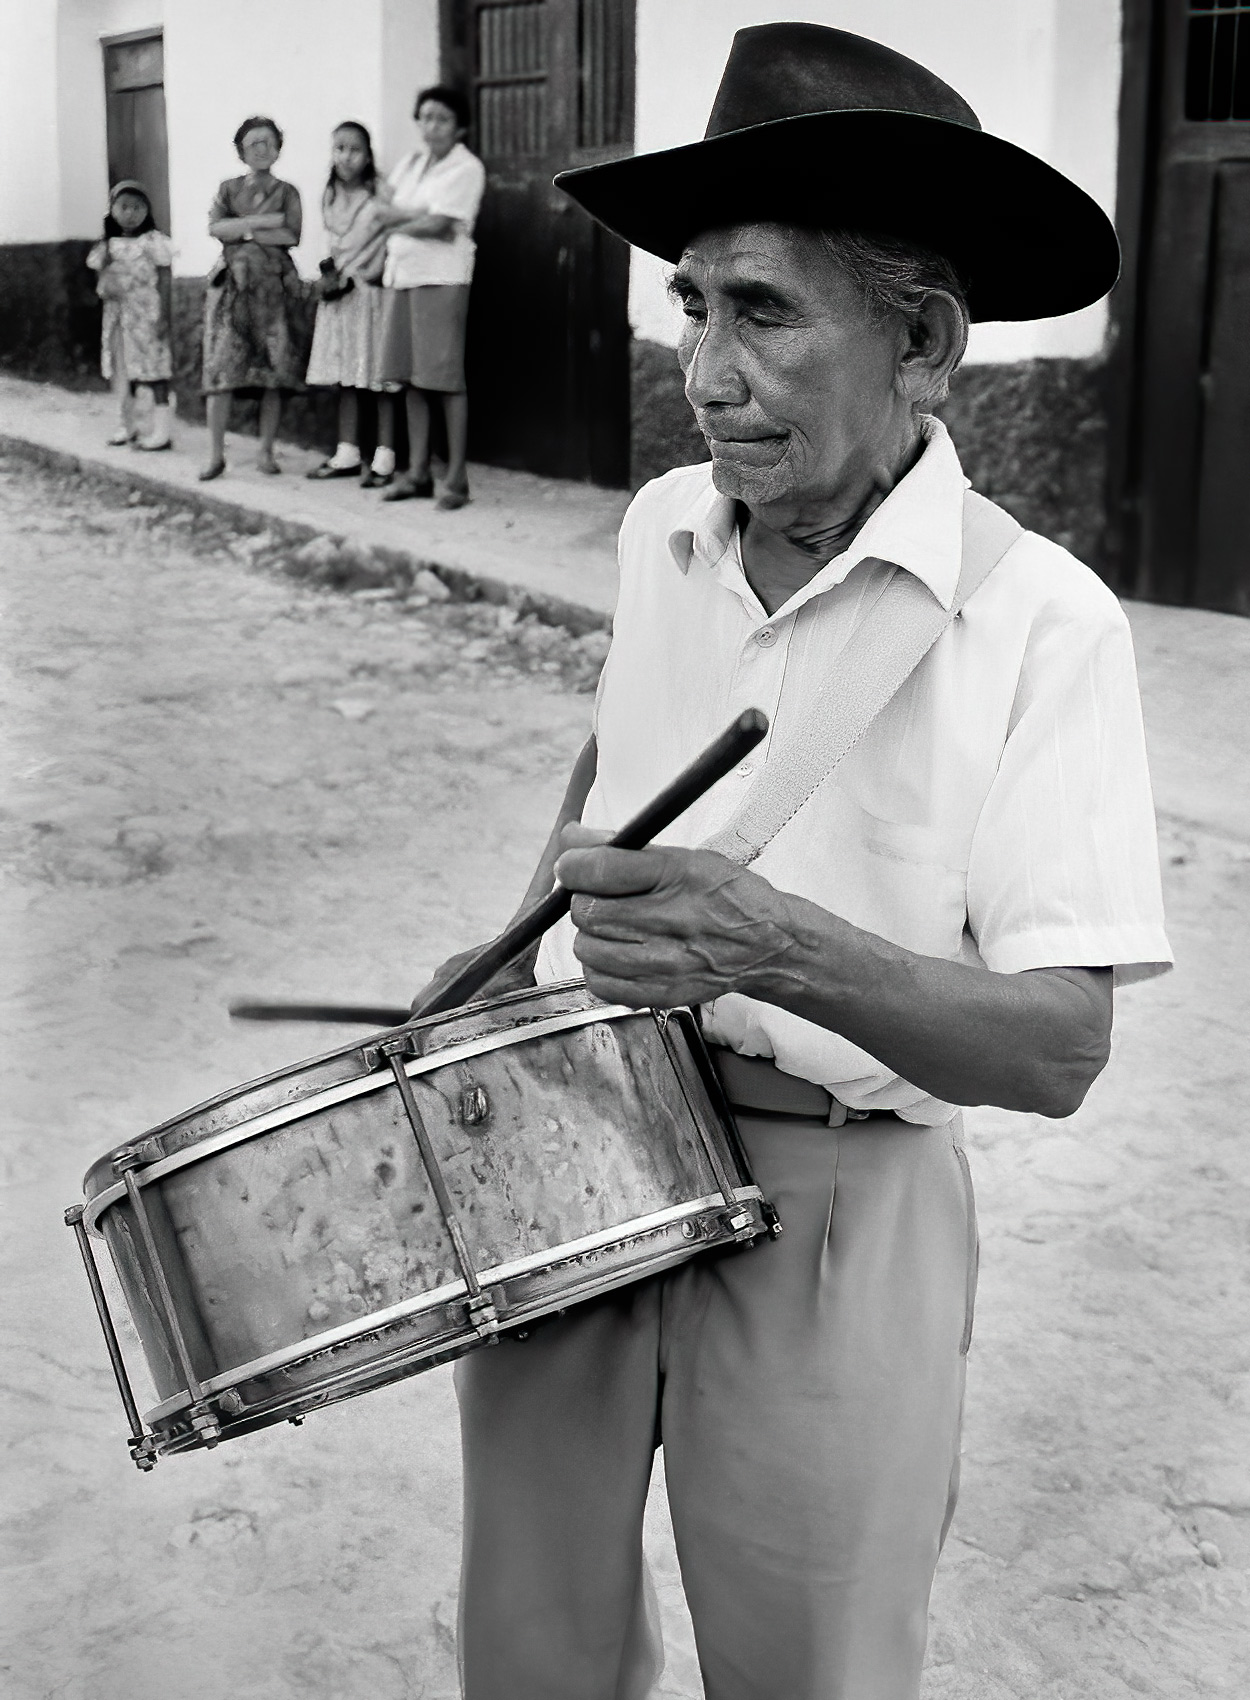 an-old-man-with-a-cowboy-hat-drums-on-the-streets-of-guatemala